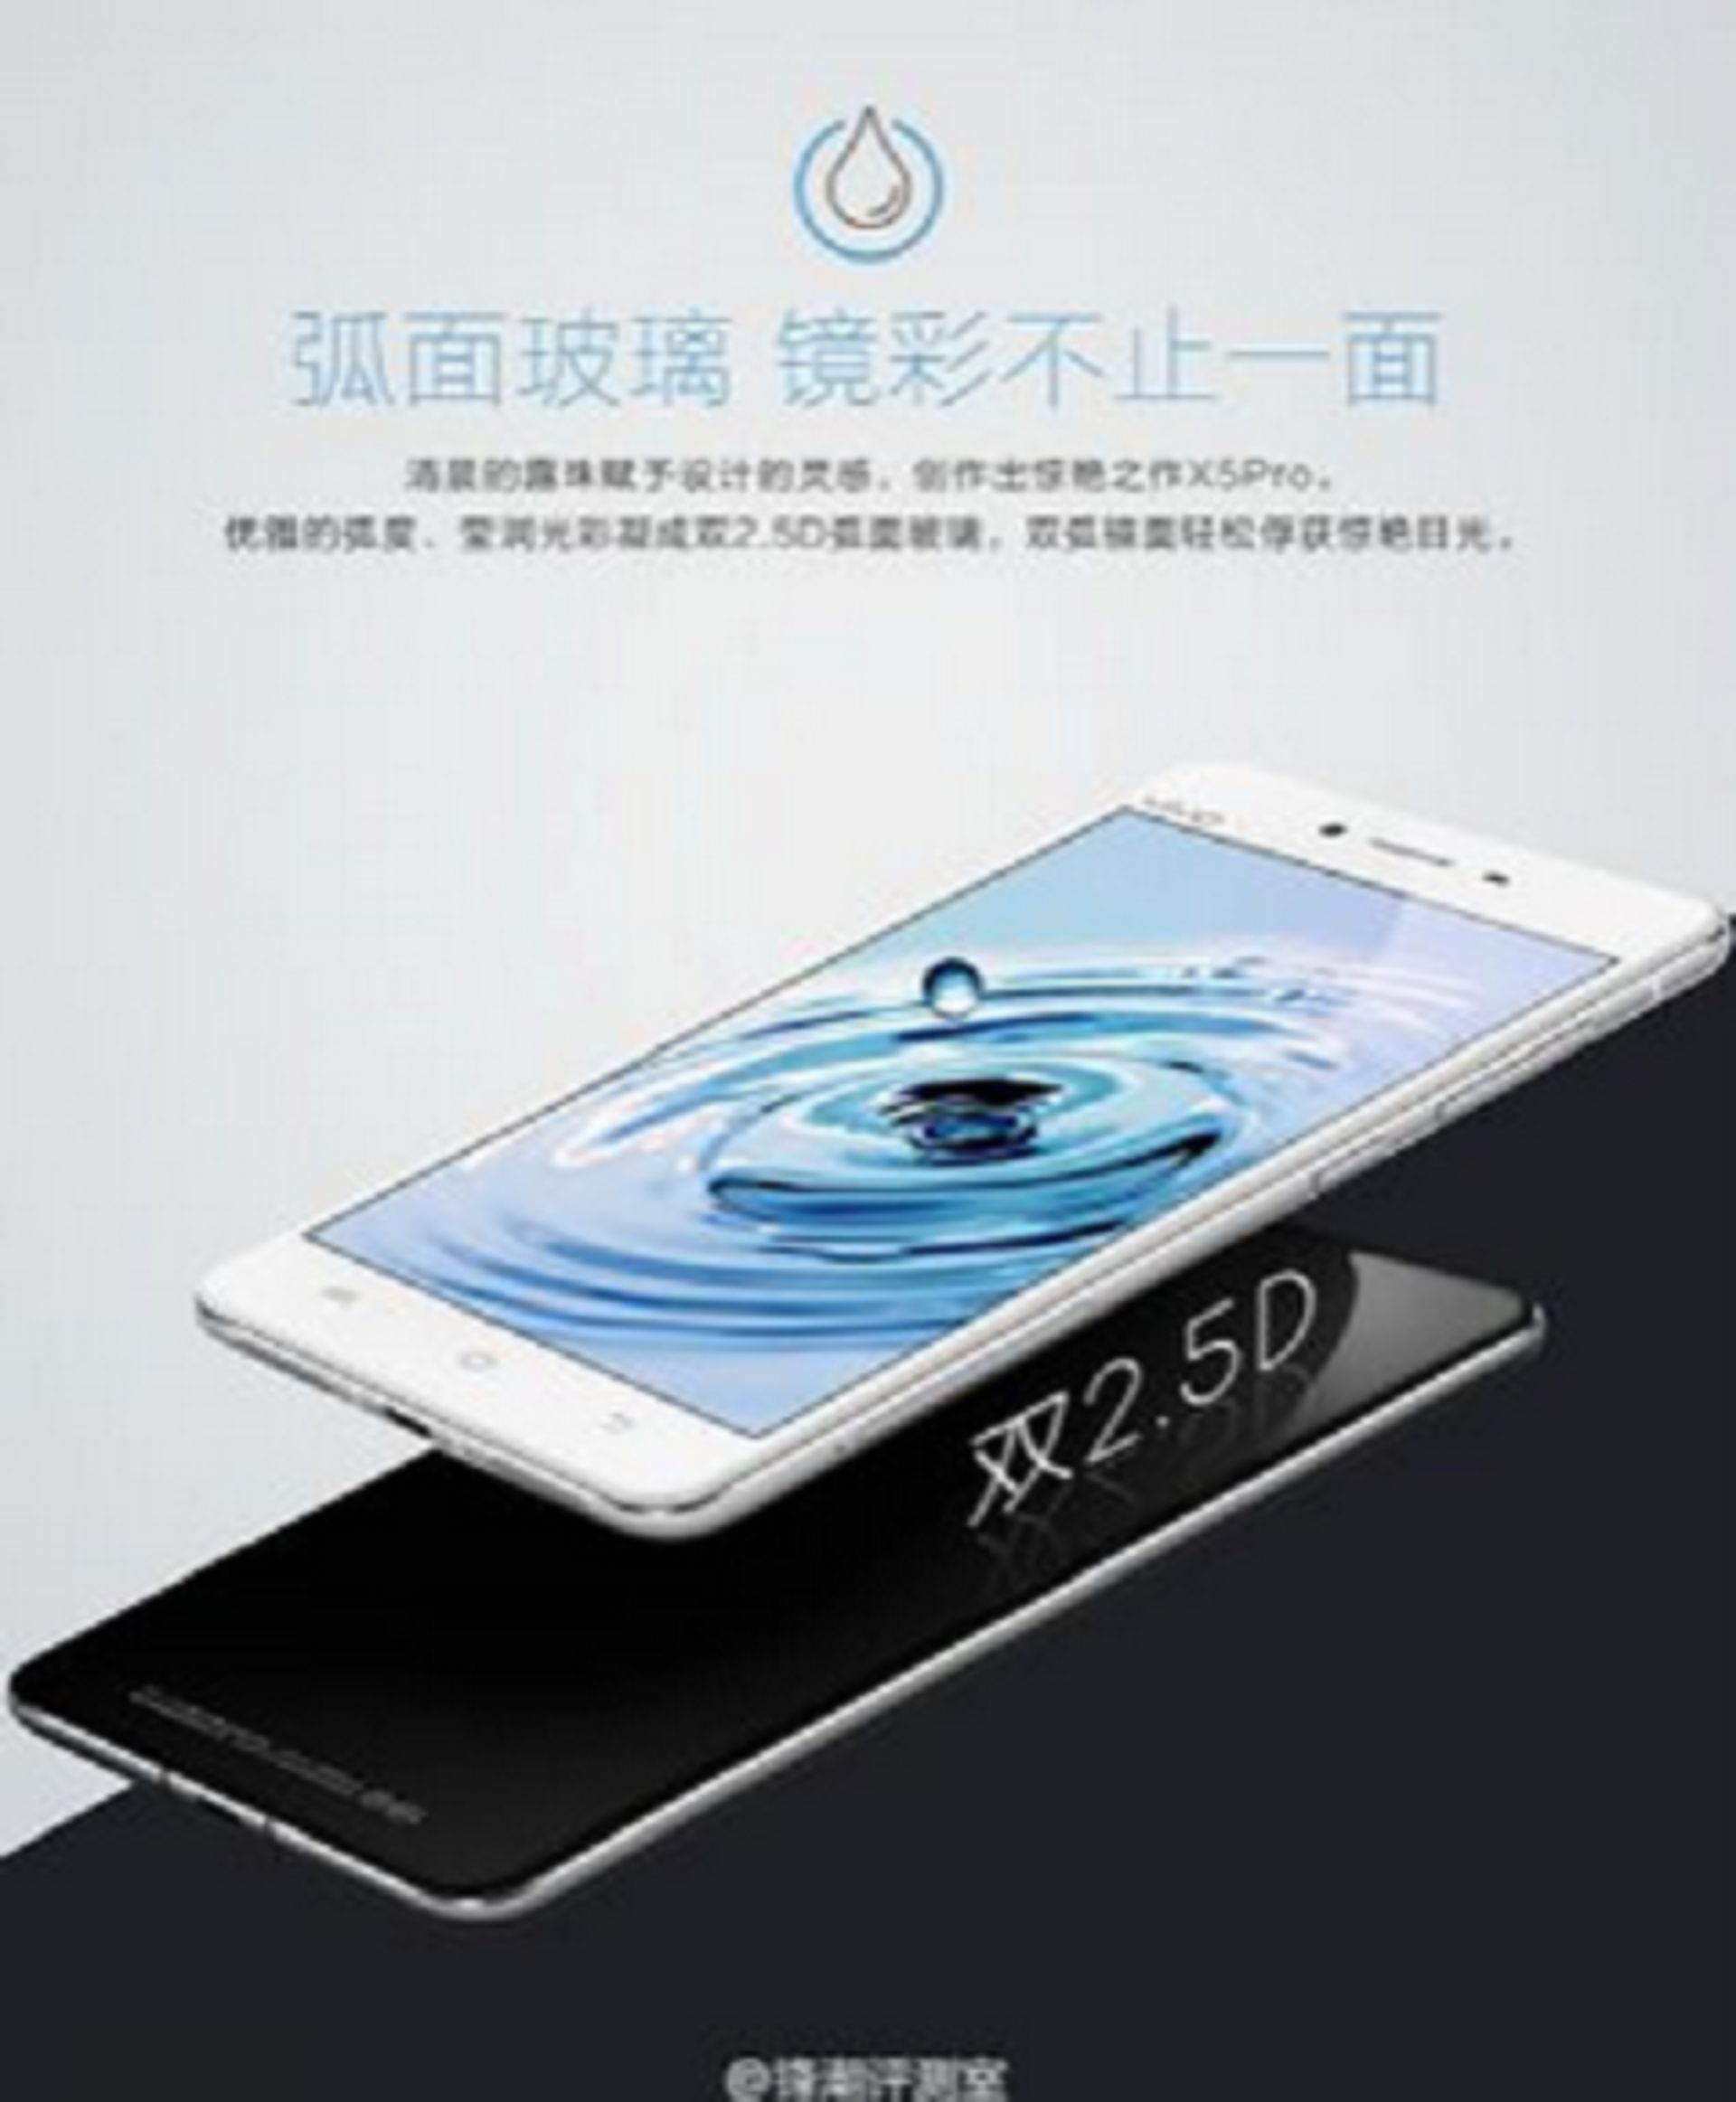 Vivo-X5-Pro-is-official 6